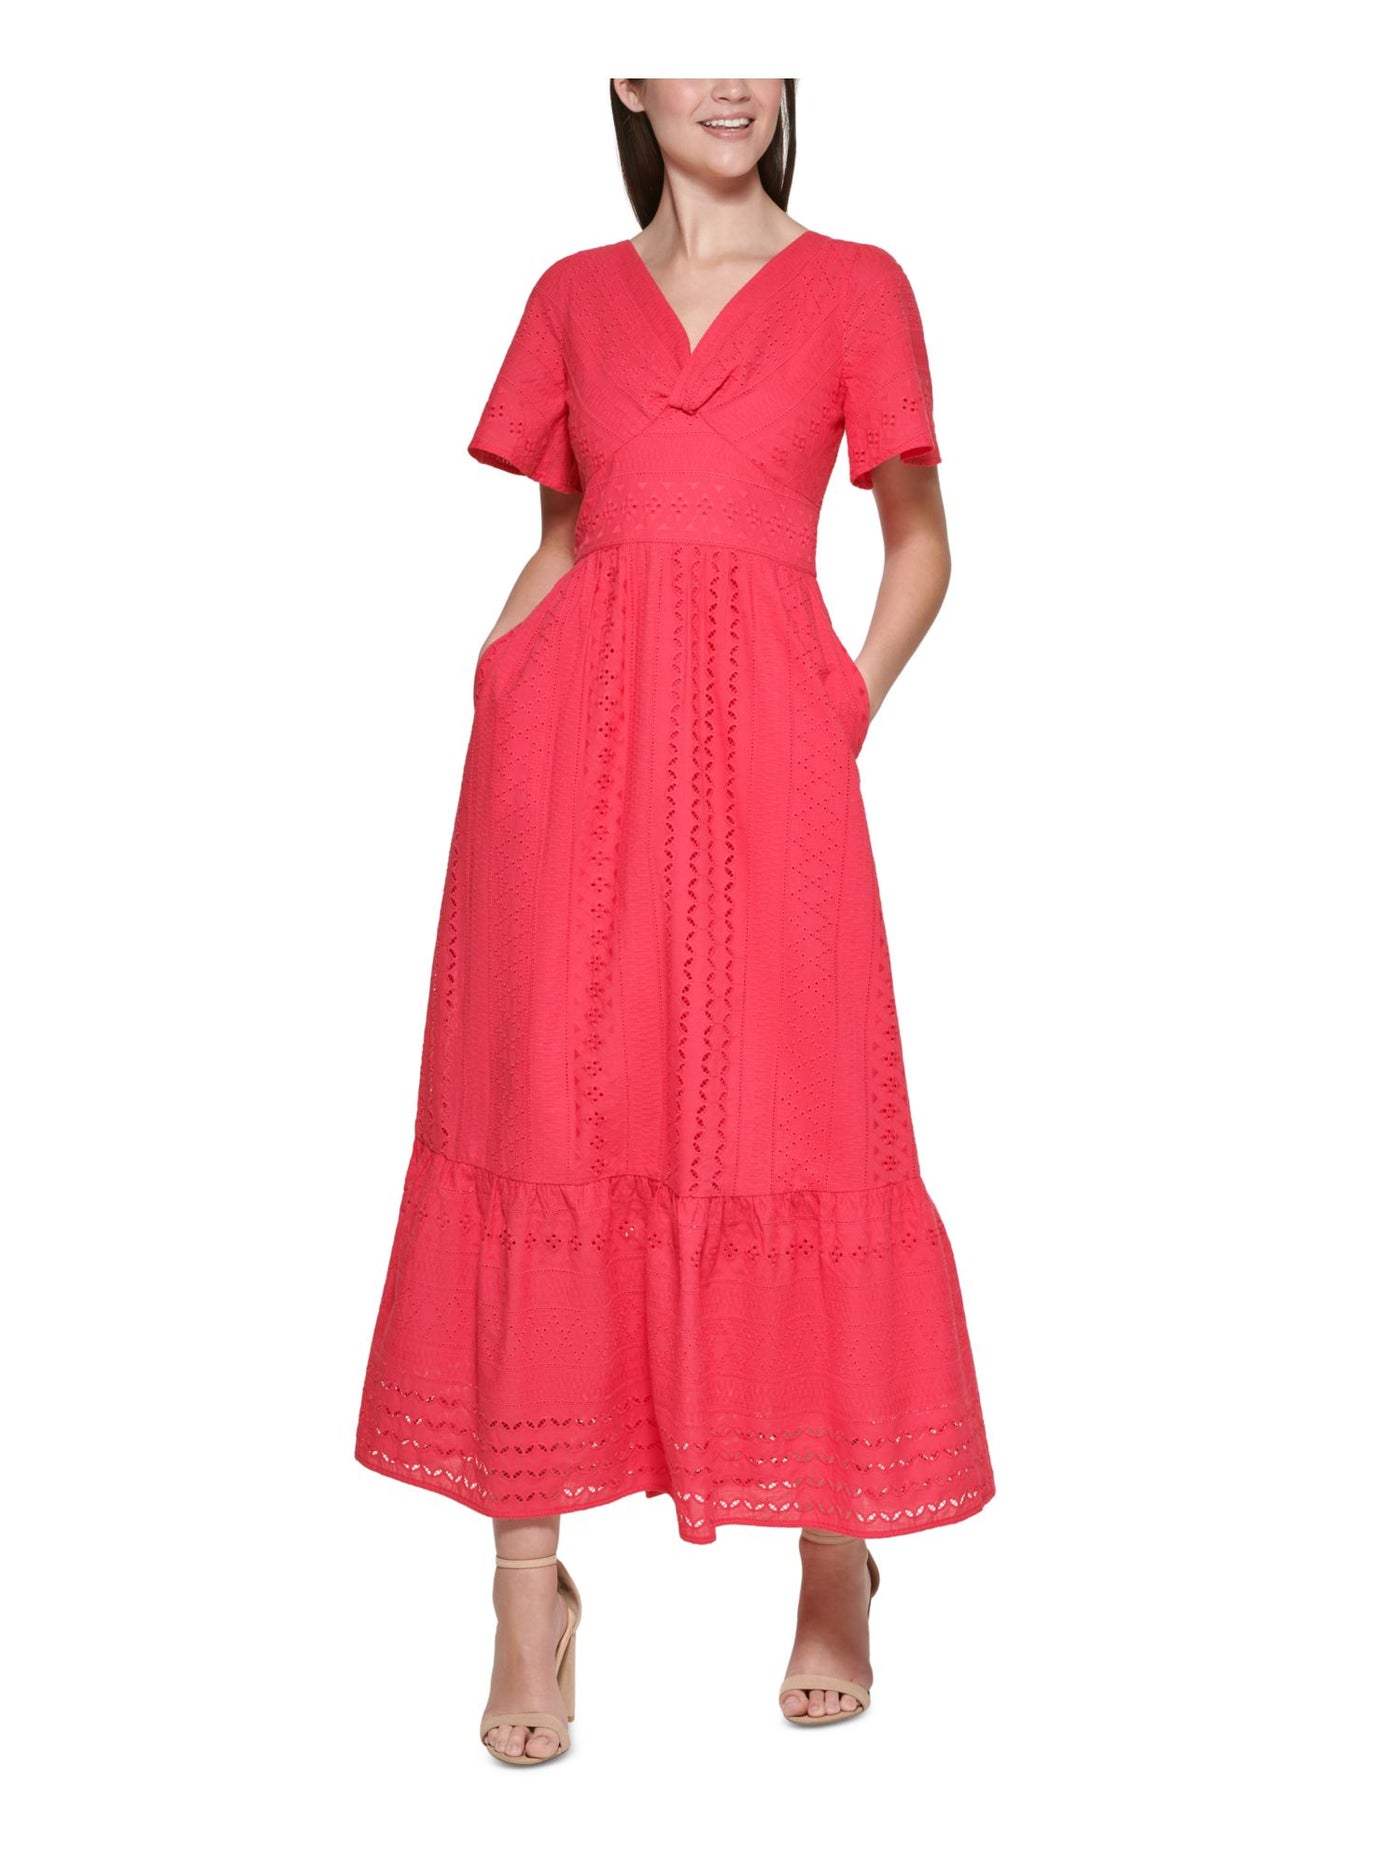 KENSIE DRESSES Womens Pink Eyelet Zippered Keyhole Back Tiered Skirt Lined Short Sleeve V Neck Maxi Wear To Work Fit + Flare Dress 2